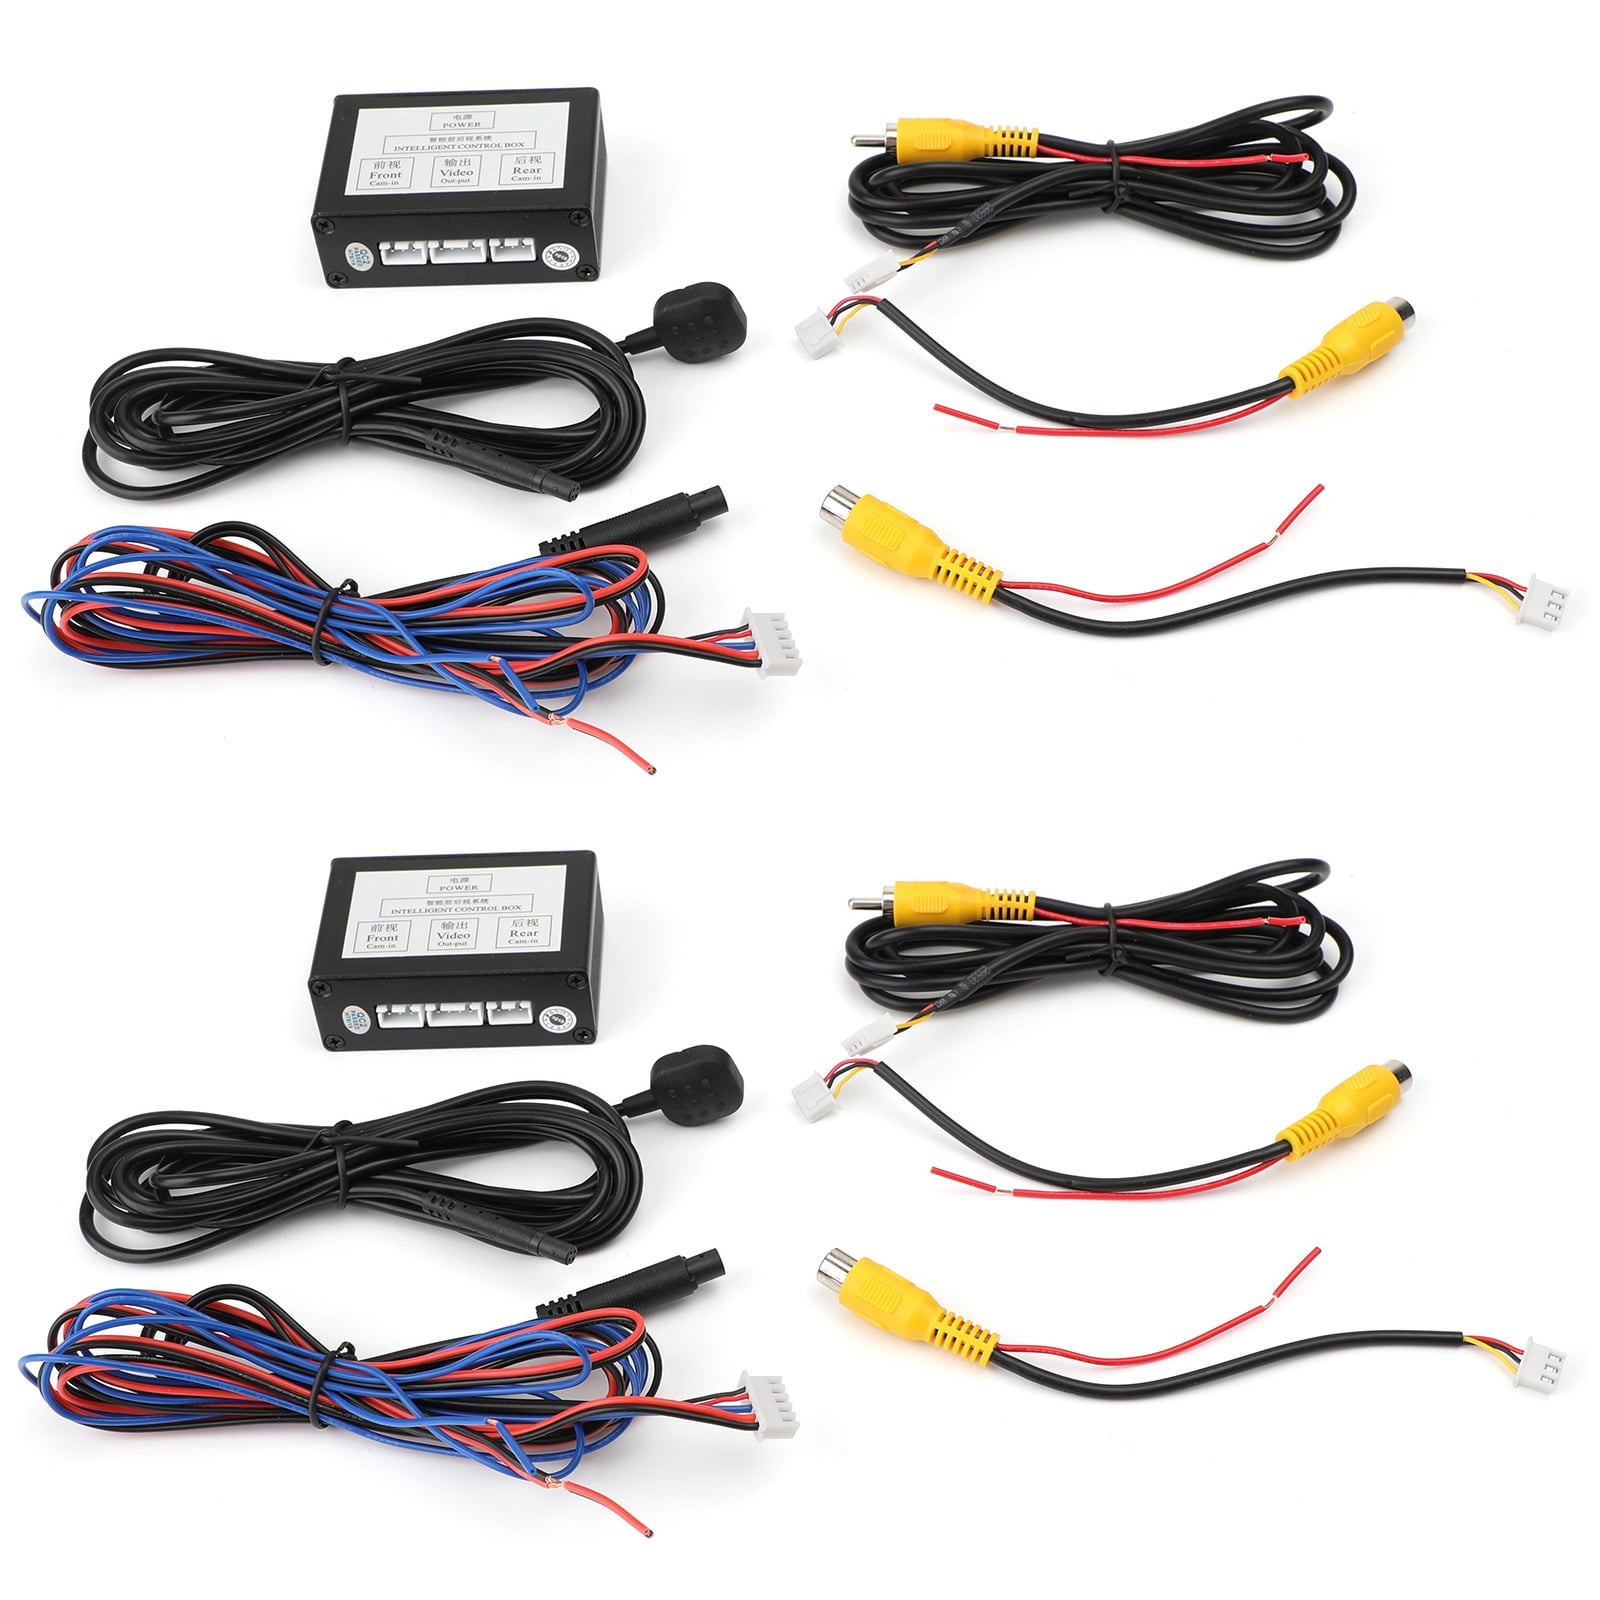  Car Front View Camera Switcher, Smart Car Parking Camera  Converter Front Rear View Video Switch Channel Control Box : Electronics